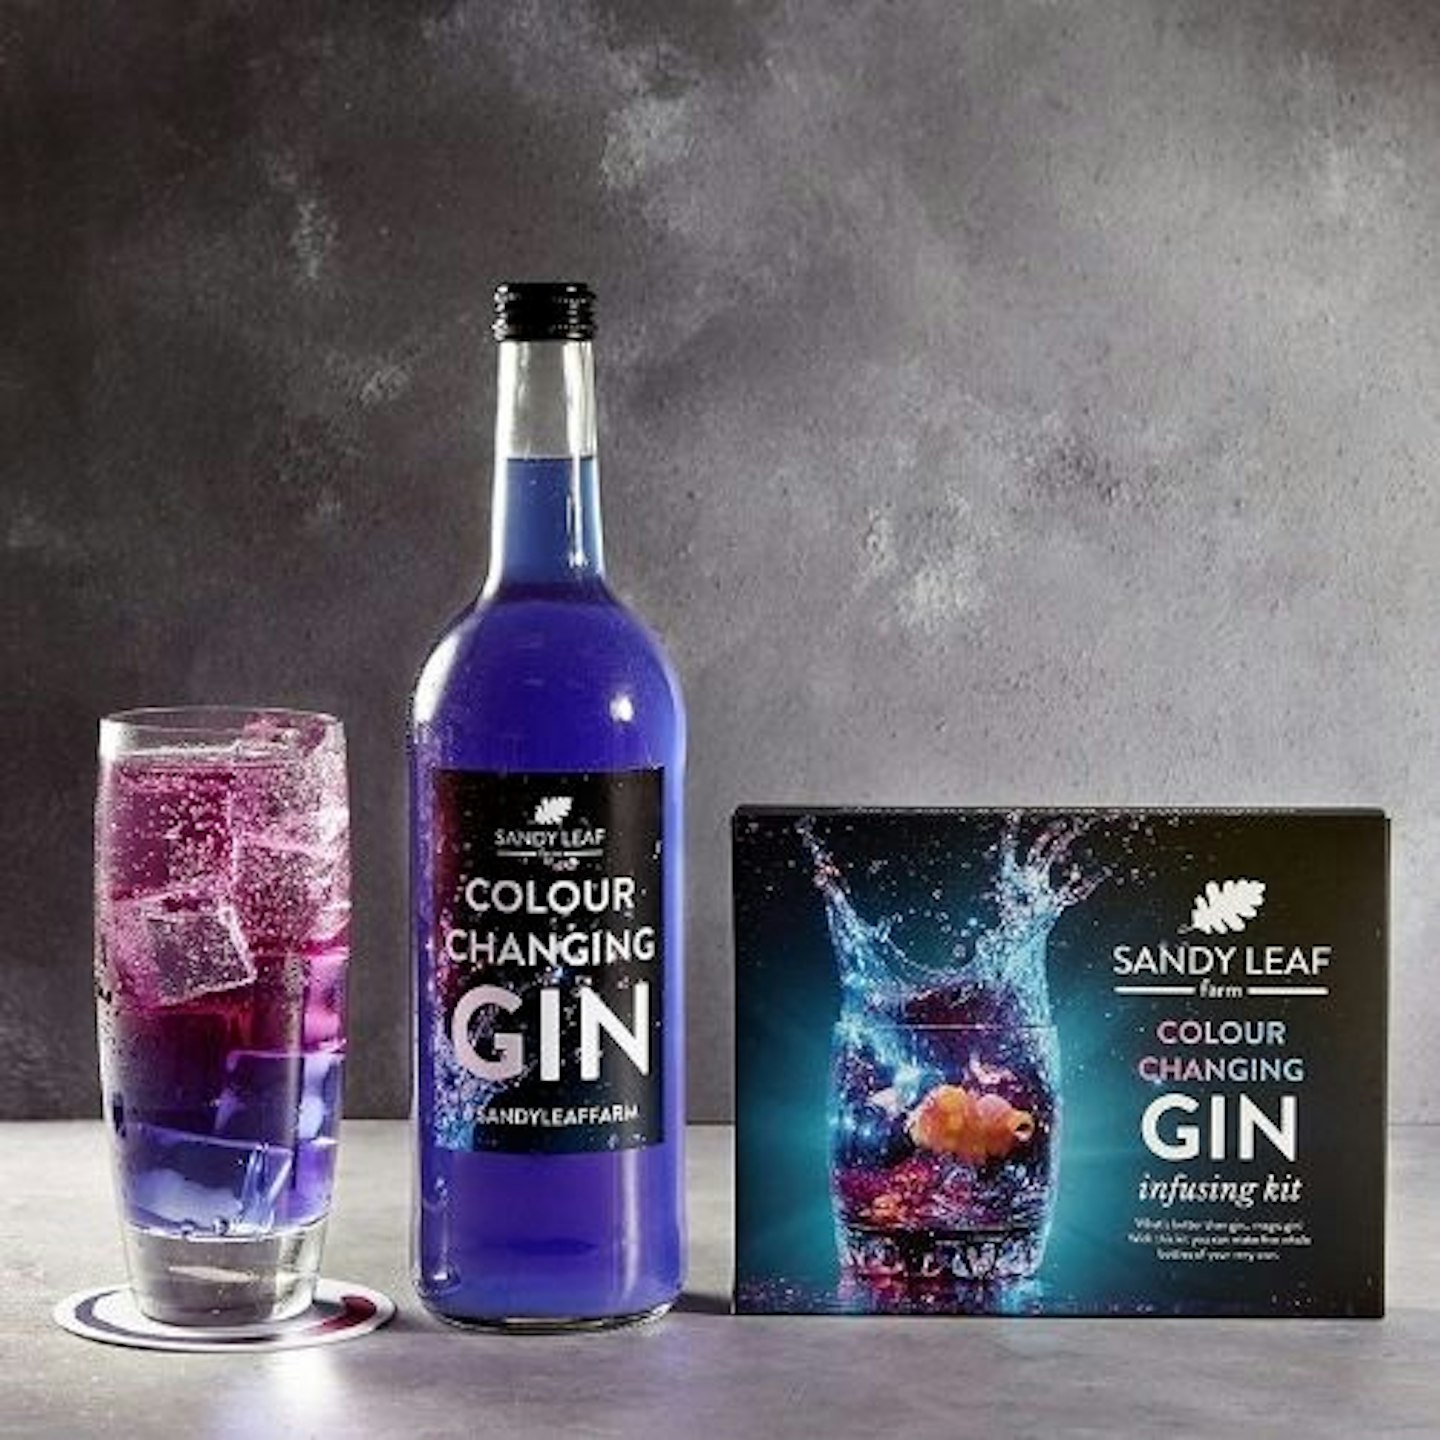 Colour Changing Gin Infusing Kit